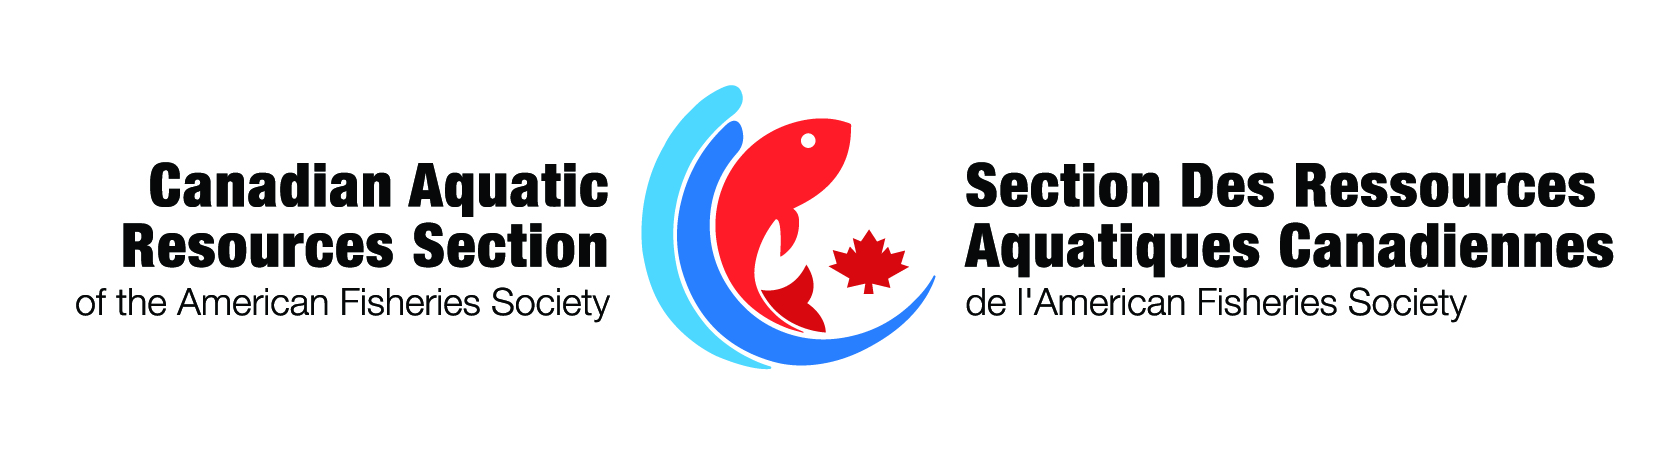 Canadian Aquatic Resources Section